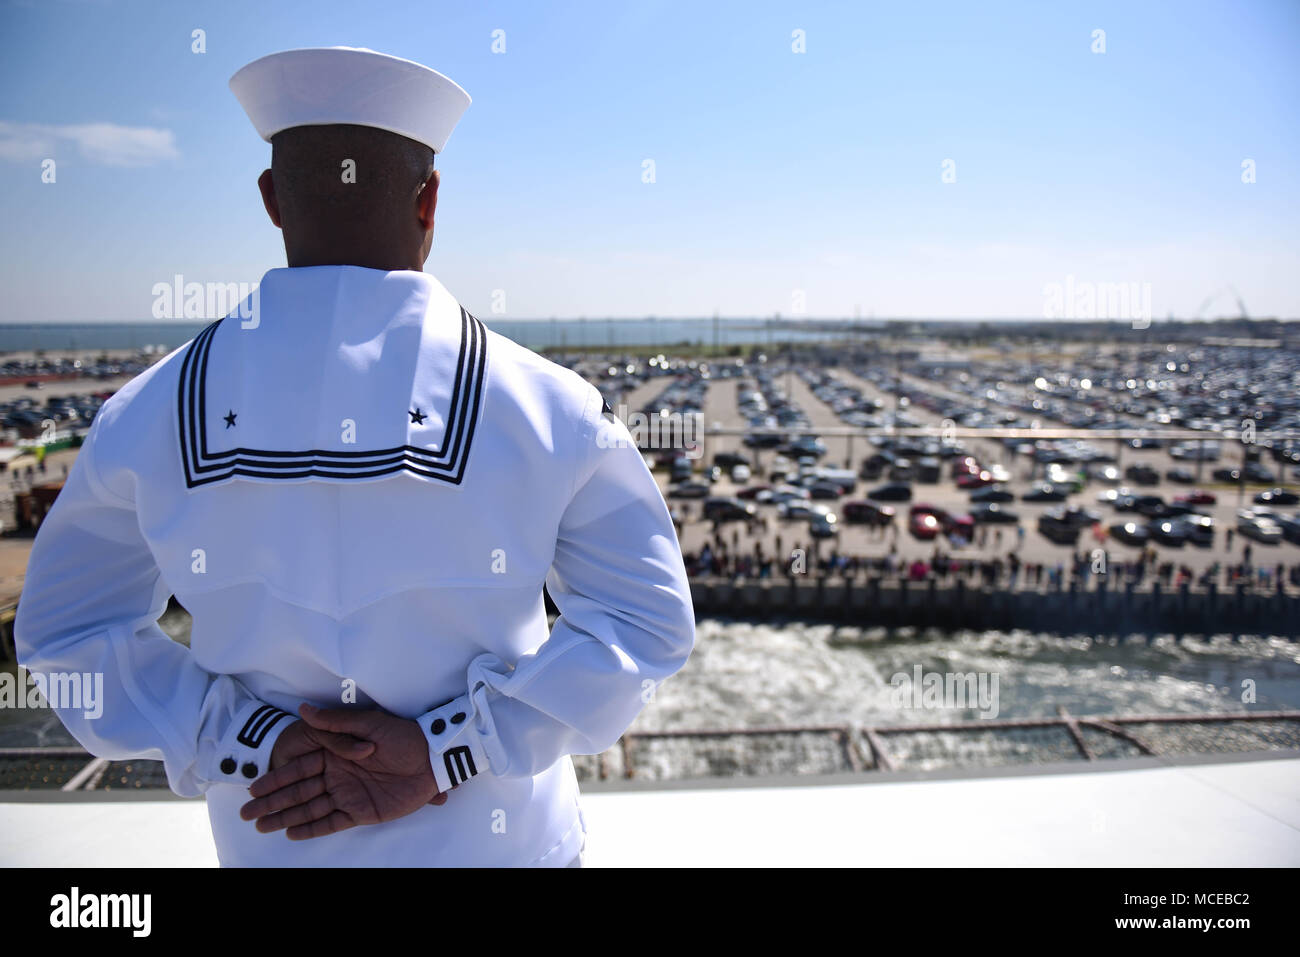 180411-N-NQ487-222  NORFOLK (April 11, 2018) Personnel Specialist 3rd Class Anthony White mans the rails aboard the aircraft carrier USS Harry S. Truman (CVN 75) during the ship's departure from homeport. Harry S. Truman is underway as the flagship for the Harry S. Truman Carrier Strike Group which includes; guided-missile cruiser USS Normandy (CG-60), and guided-missile destroyers USS Arleigh Burke (DDG-51), USS Bulkeley (DDG-84), USS Farragut (DDG-99), USS Forrest Sherman (DDG-98), USS The Sullivans (DDG-68), USS Winston S. Churchill (DDG-81) for a regularly scheduled deployment. (U.S. Navy  Stock Photo